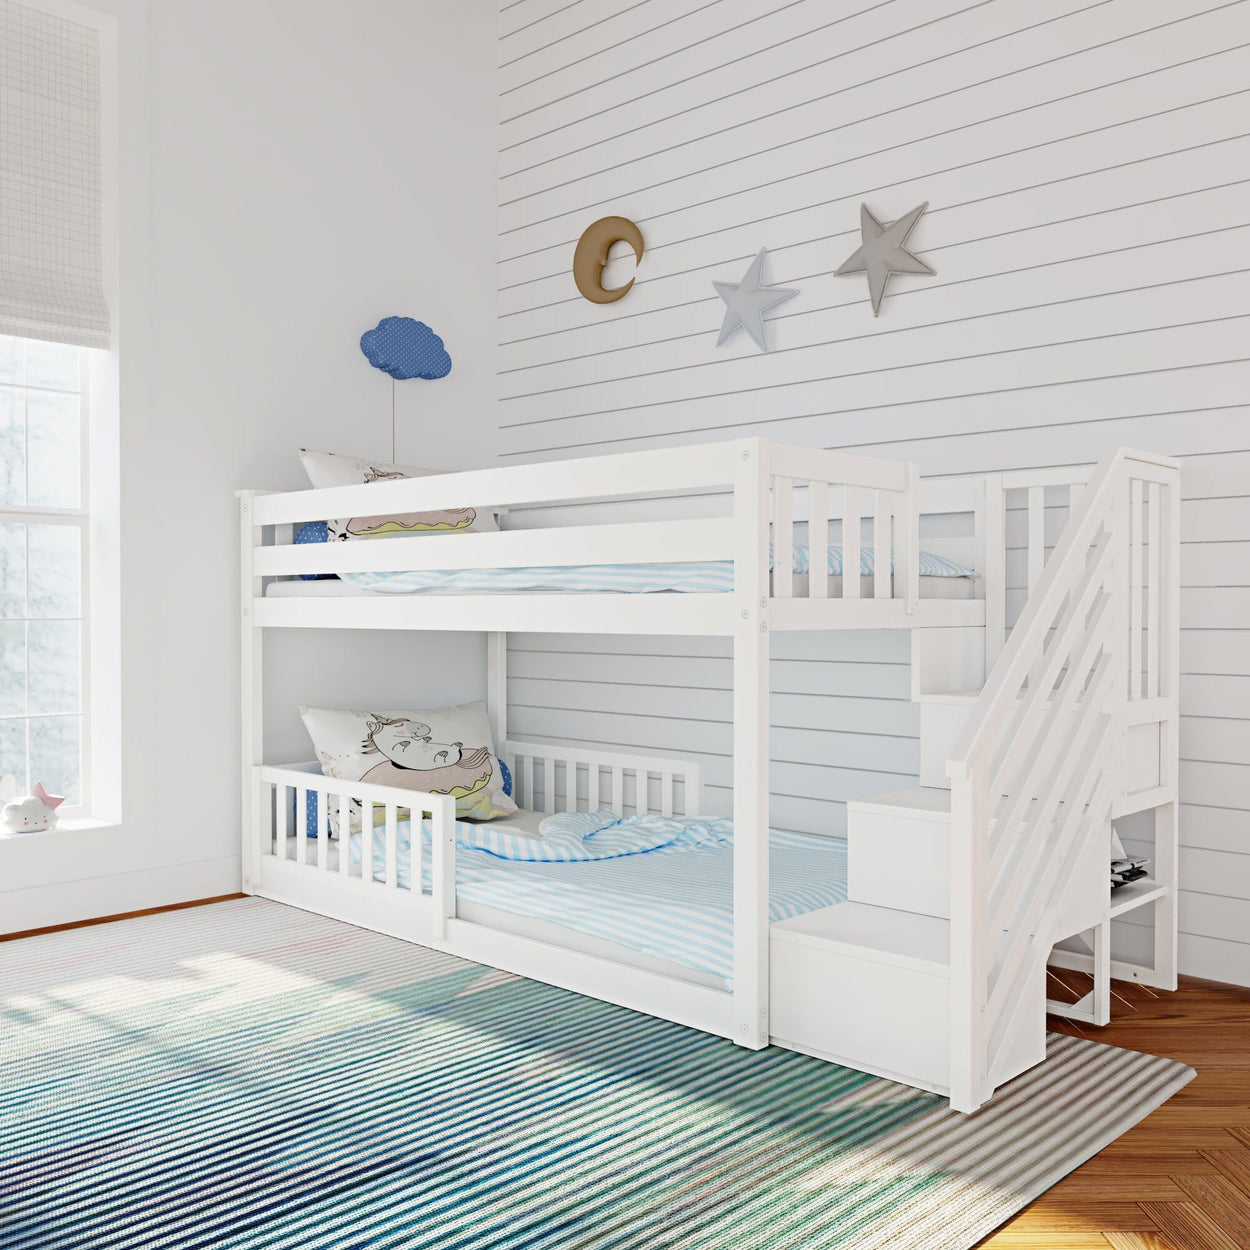 185220002209 : Bunk Beds Low Bunk with Stairs and Two Guard Rails, White